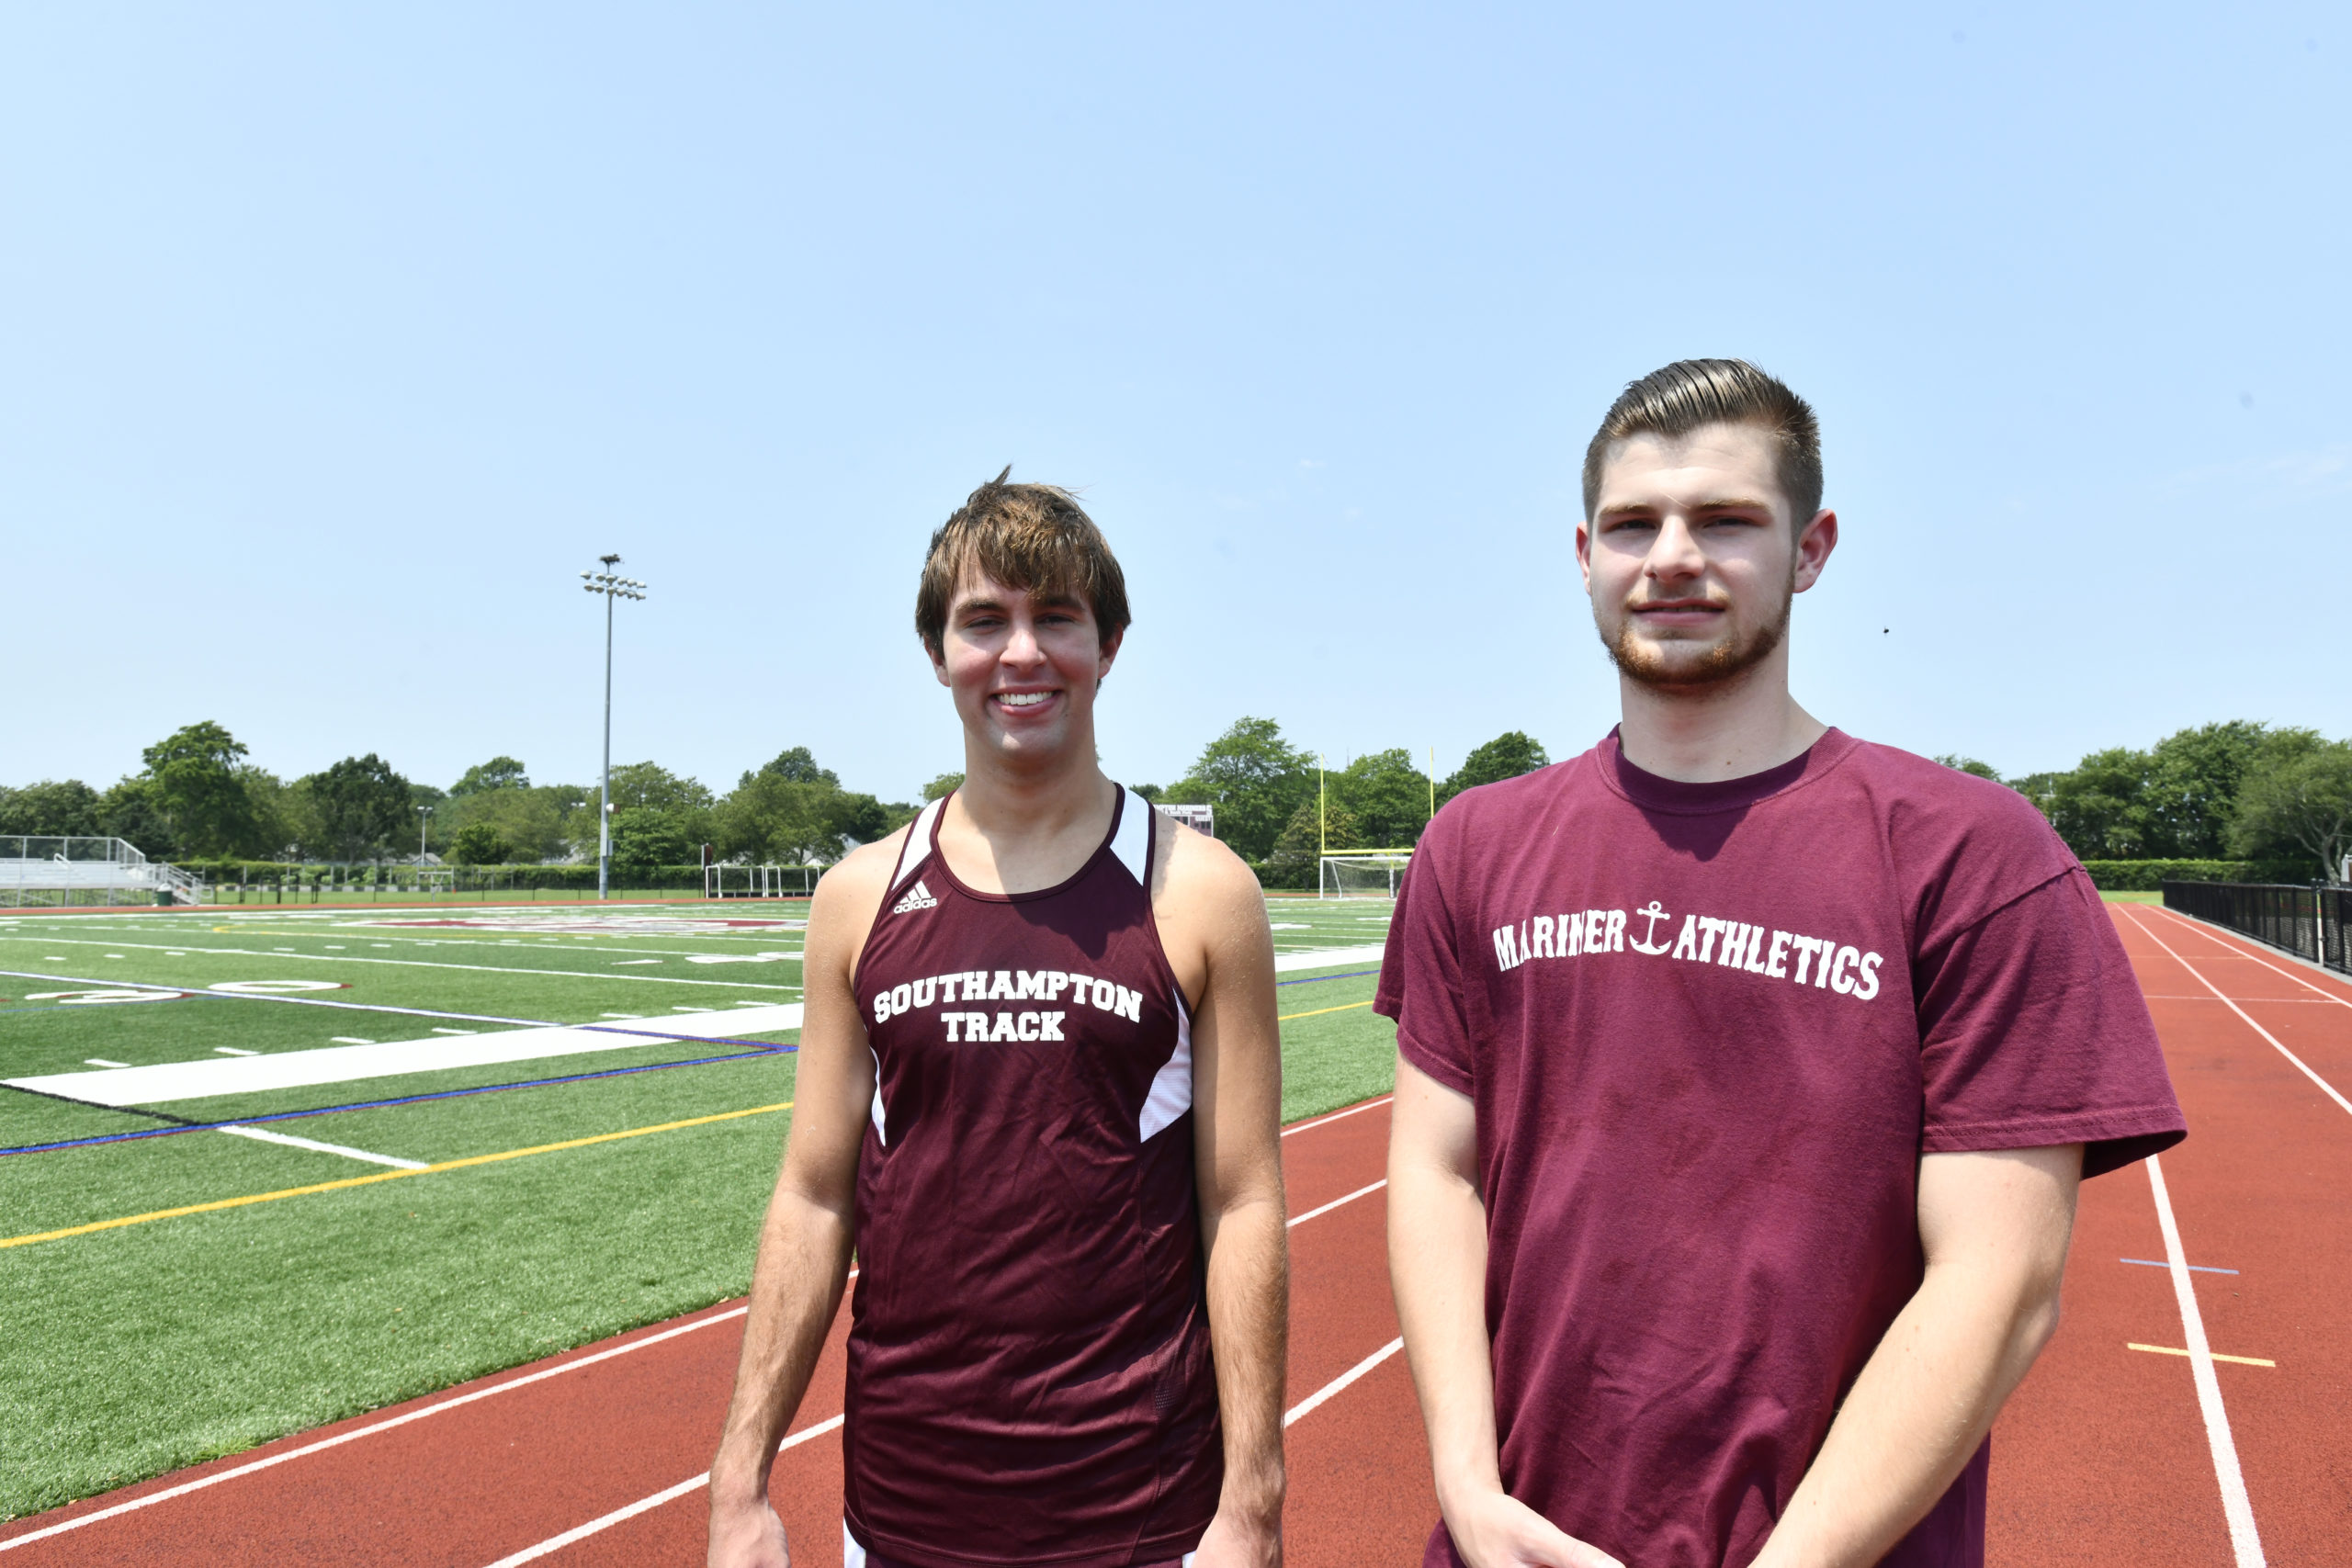 Southampton residents William Segarra, left, and Ross Ebrus will represent Team New York at the Special Olympics USA Games, in track and field, next June in Orlando, Florida. They were chosen based on their performances at the 2019 State Games. Segarra competes in the long jump and 1,600-meter race, while Ebrus competes in the shot put and 800-meter race.   DANA SHAW